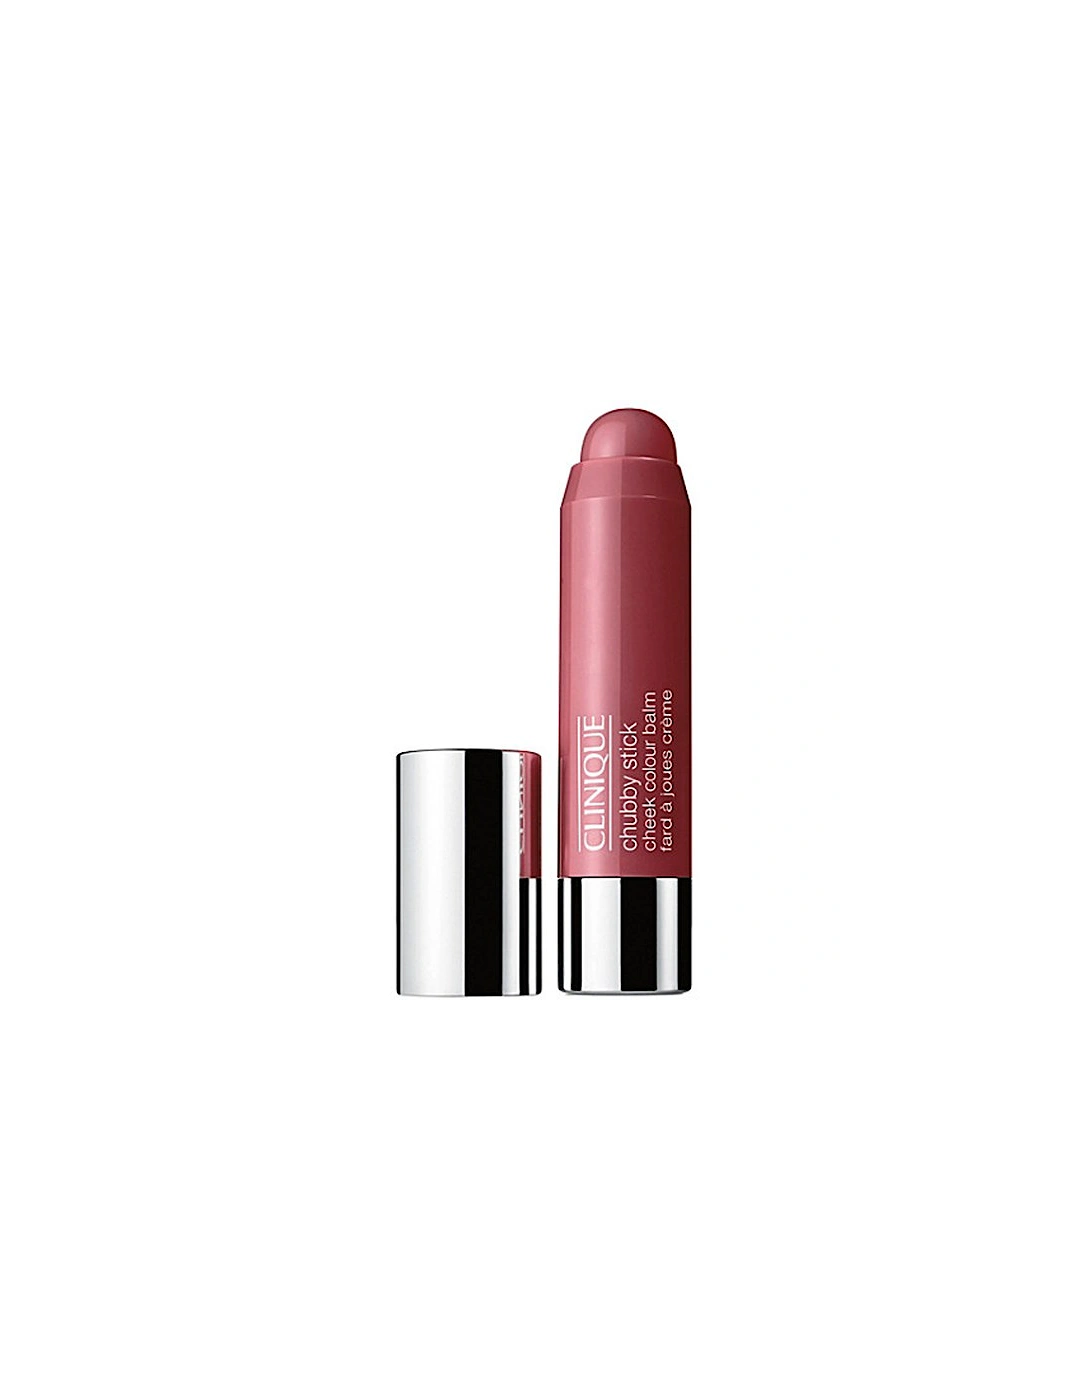 Chubby Stick Cheek Colour Balm Plumped Up Peony, 2 of 1